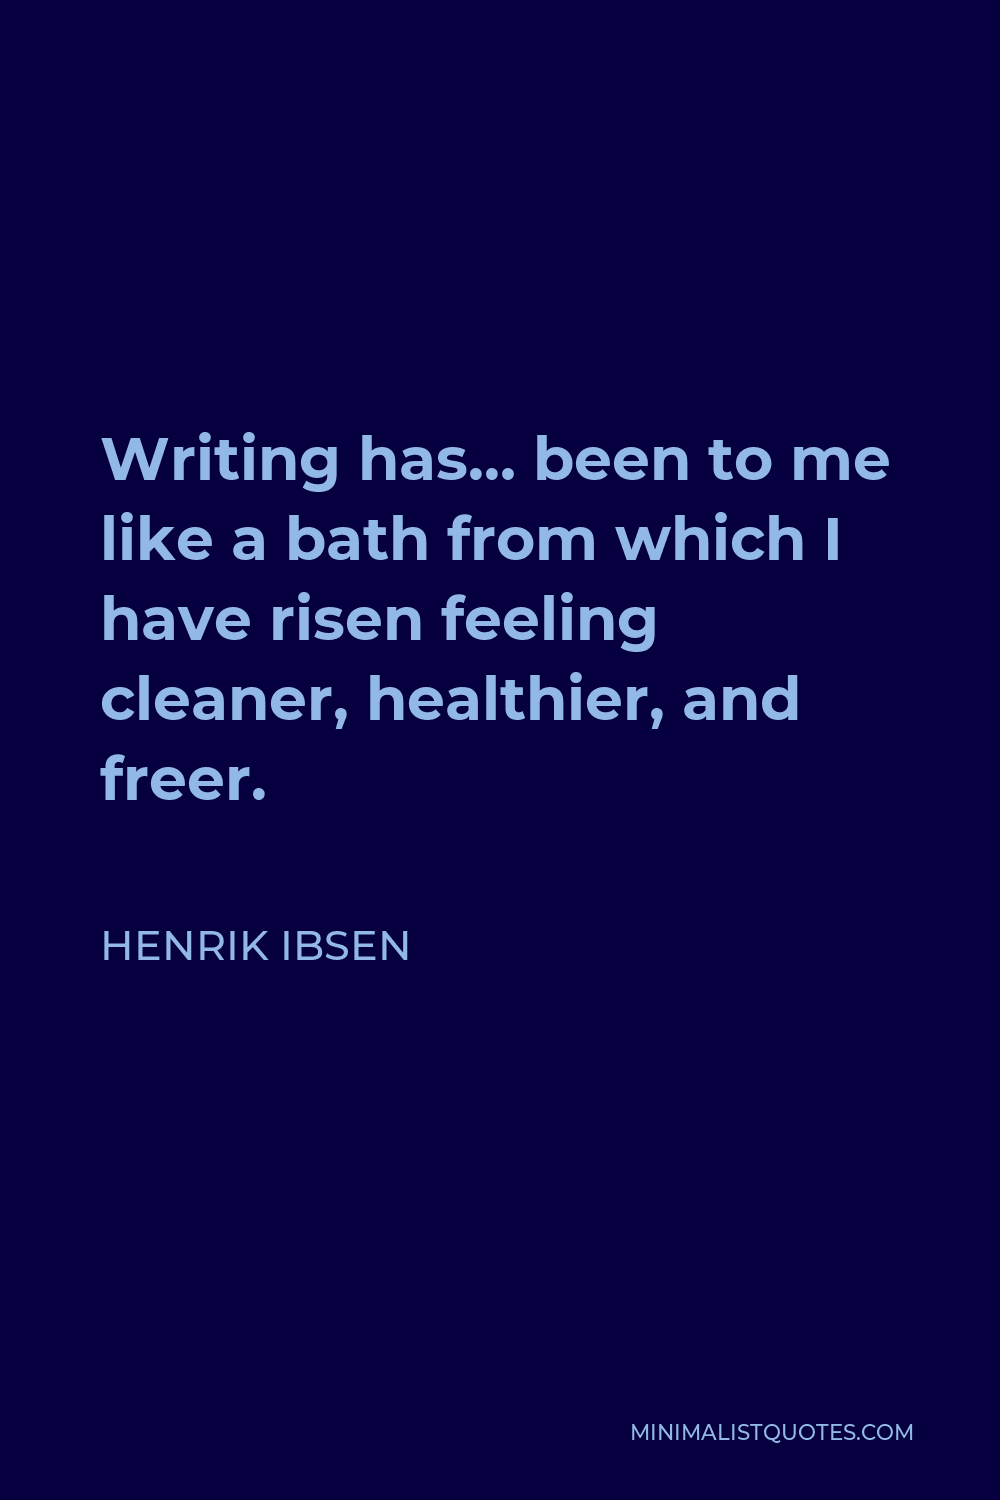 Henrik Ibsen Quote - Writing has… been to me like a bath from which I have risen feeling cleaner, healthier, and freer.